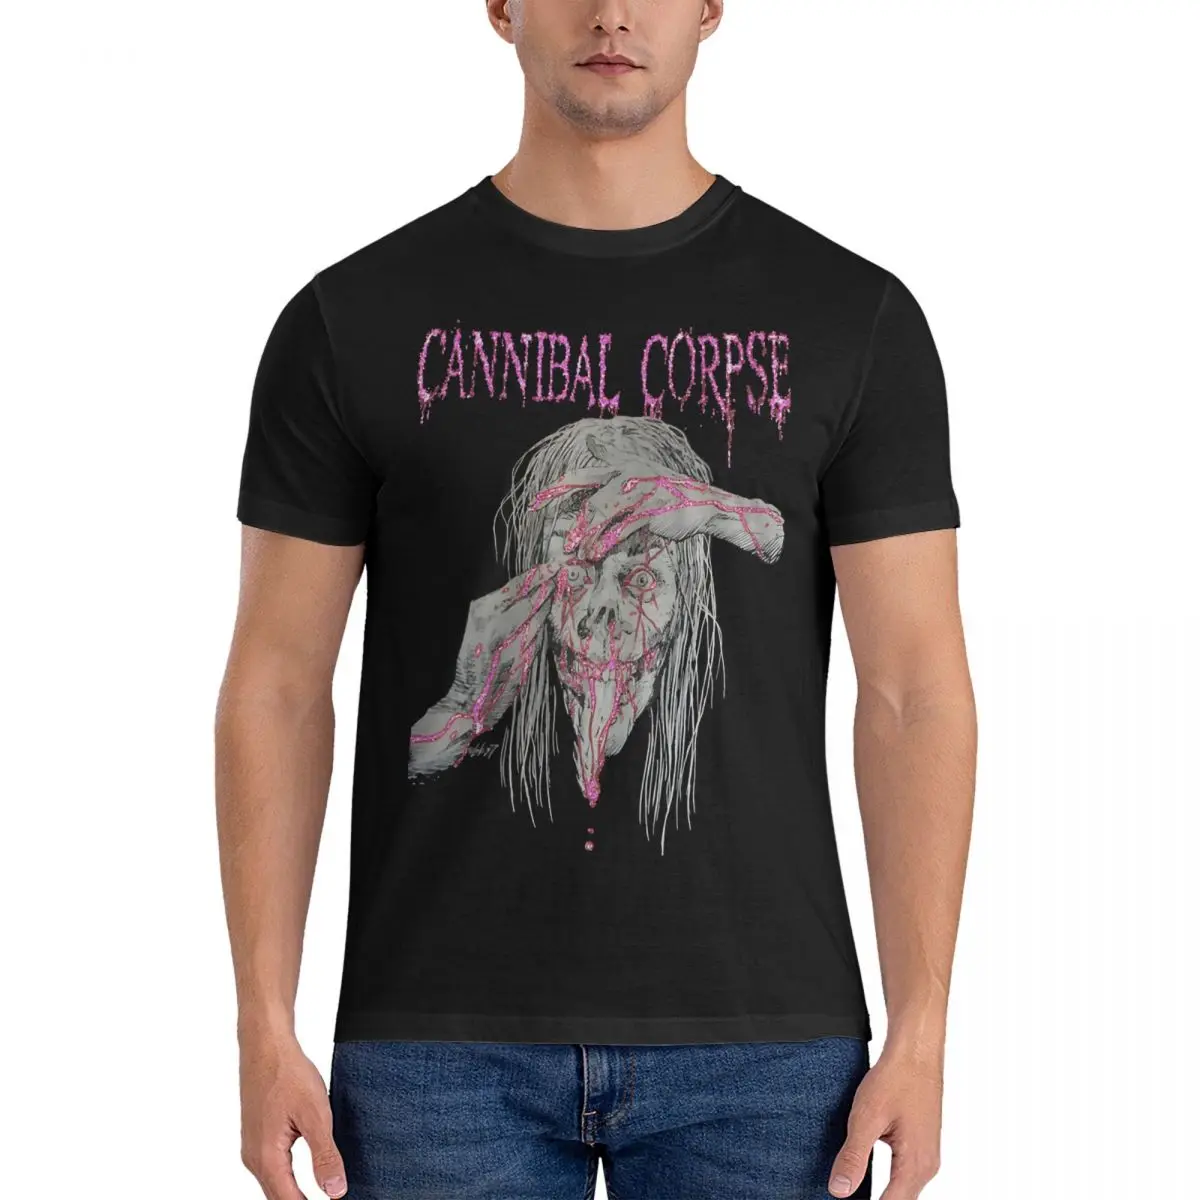 

Men's Band T Shirts Cannibal Corpse Pure Cotton Clothes Funny Short Sleeve Round Collar Tees Printed T-Shirt